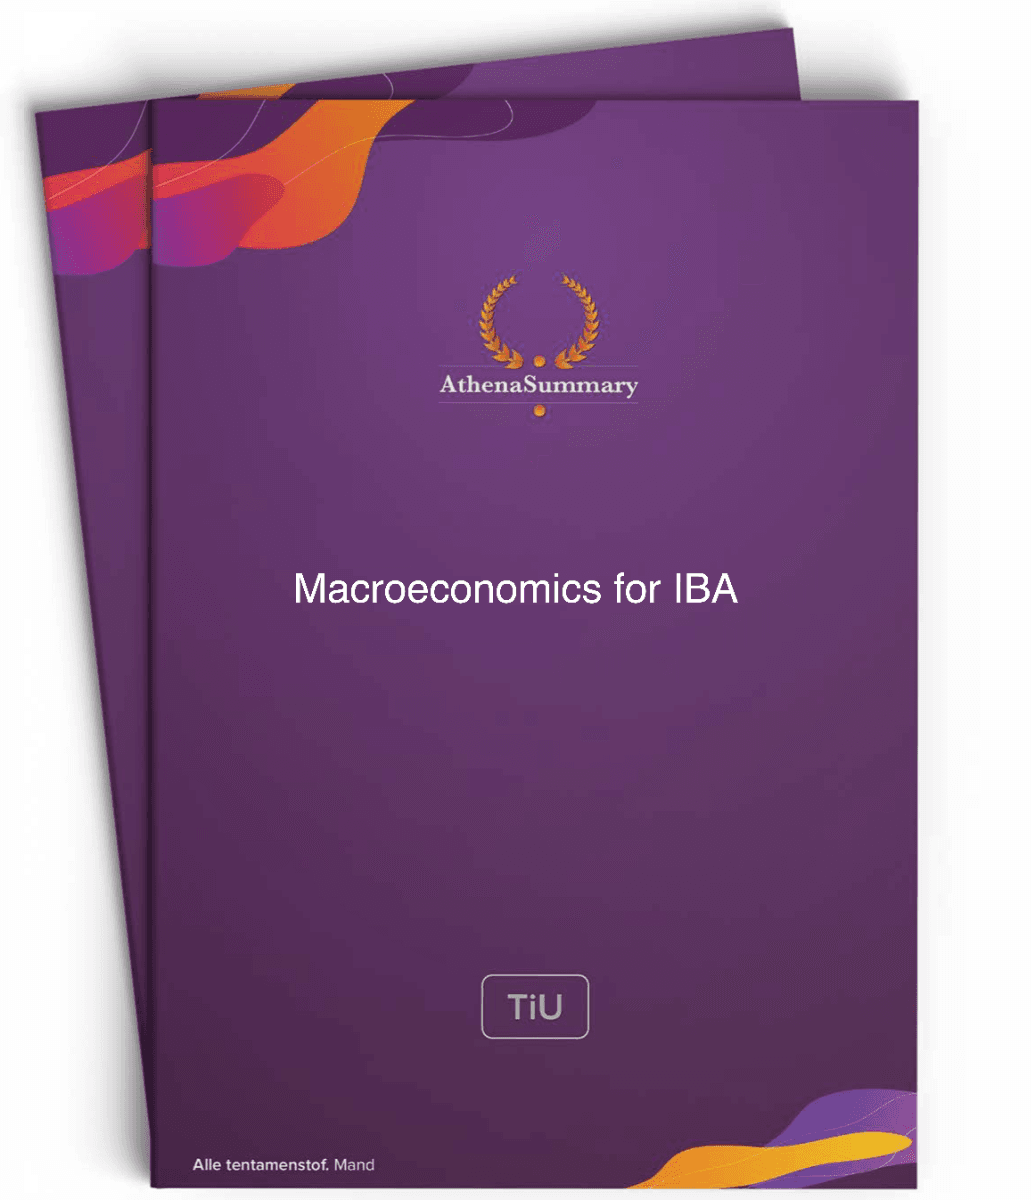 Literature and Lecture Summary: Macroeconomics for IBA